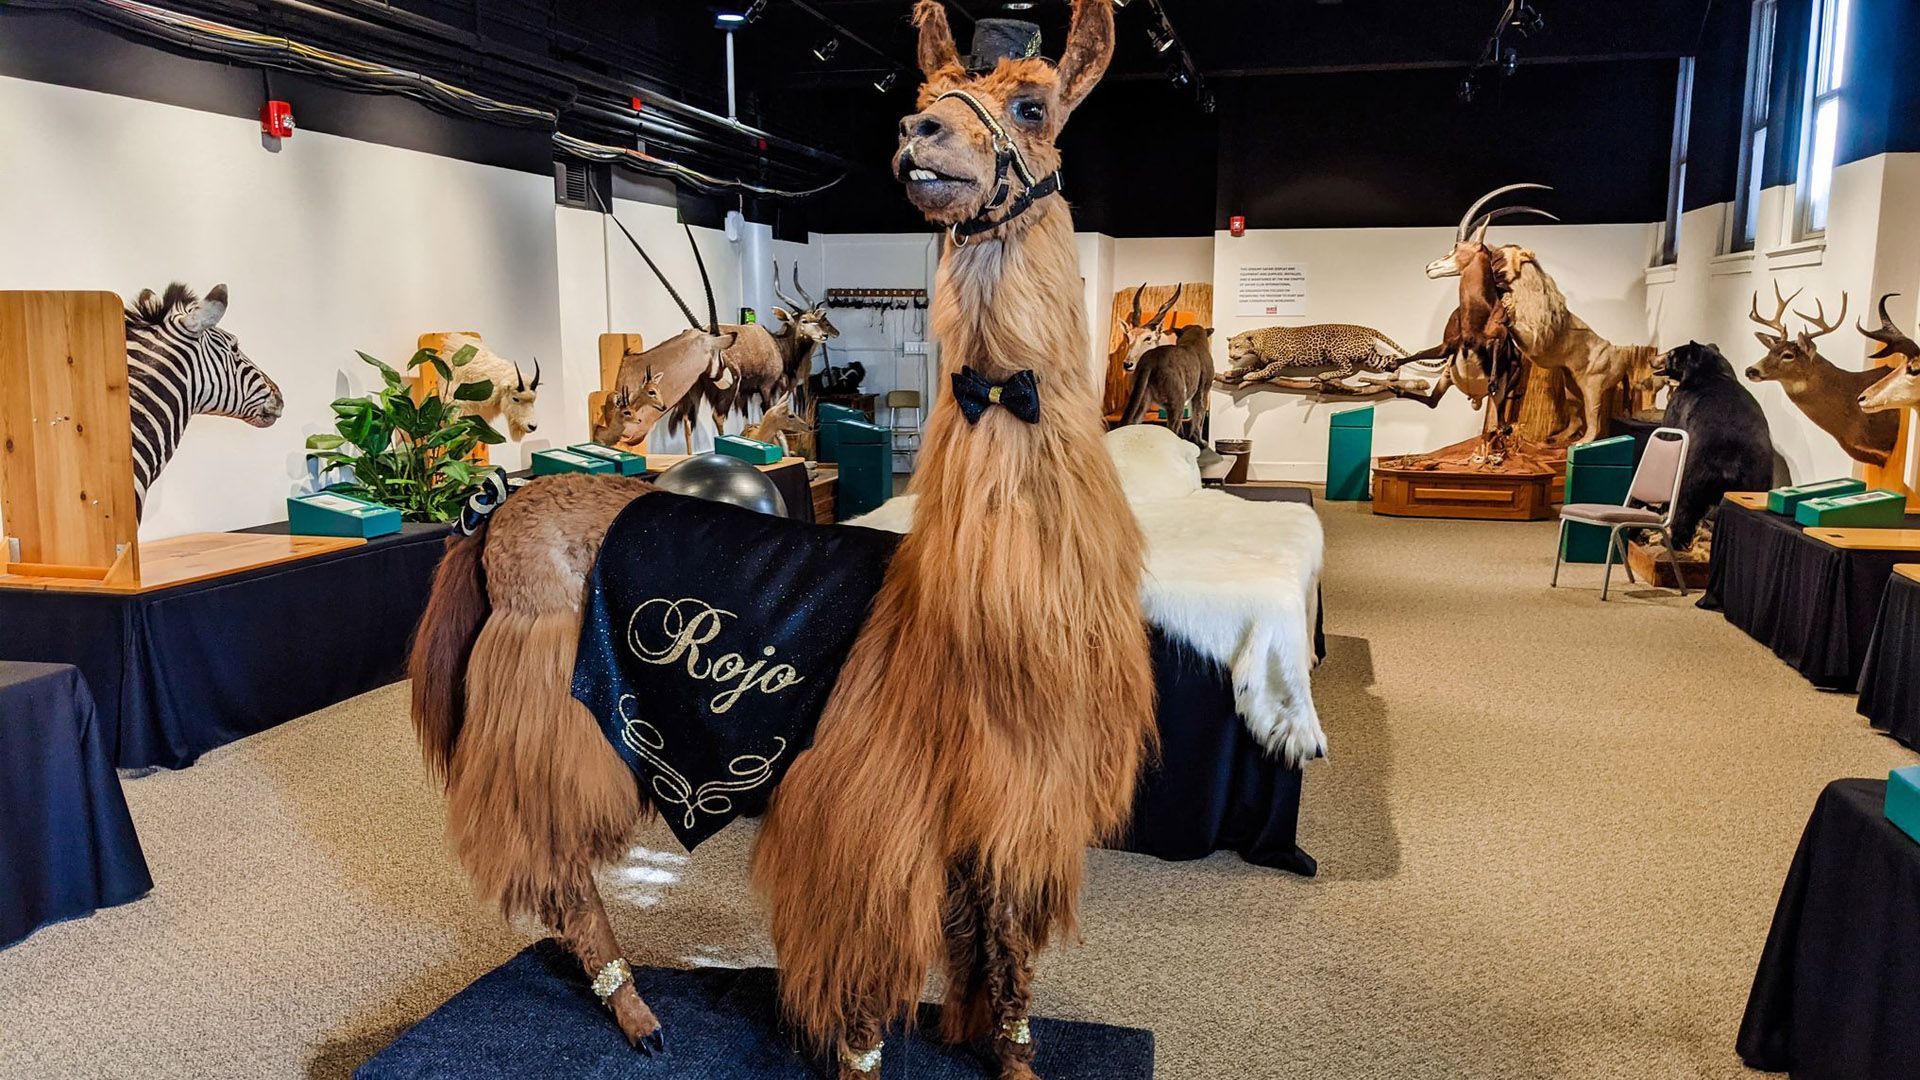 A taxidermy version of Rojo the llama, who was a mascot of Portland, Oregon, on display in a museum.